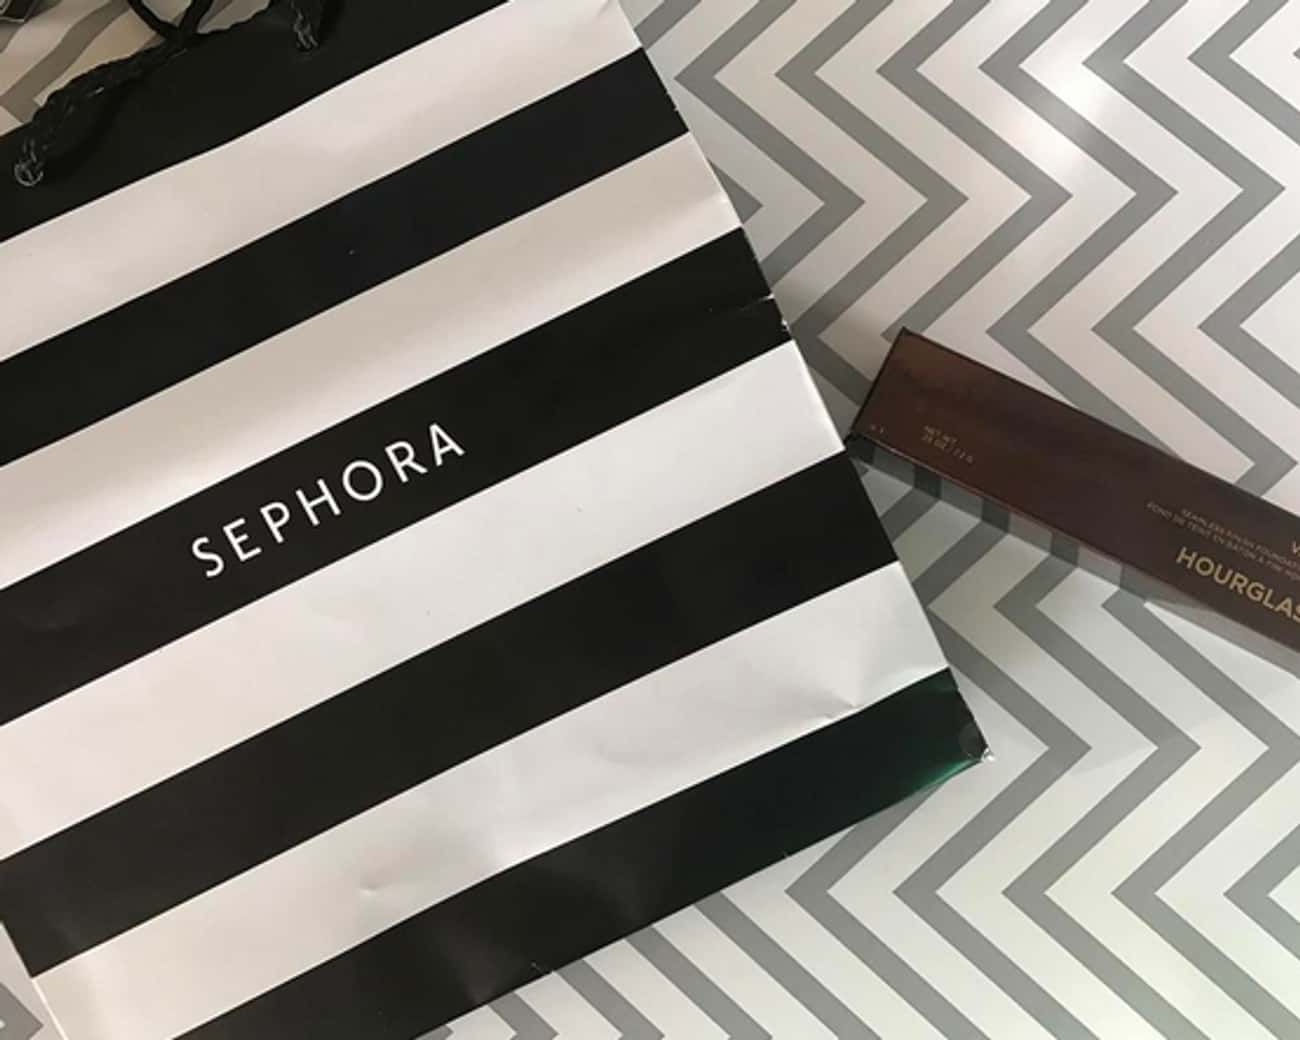 Get A Free Gift From Sephora